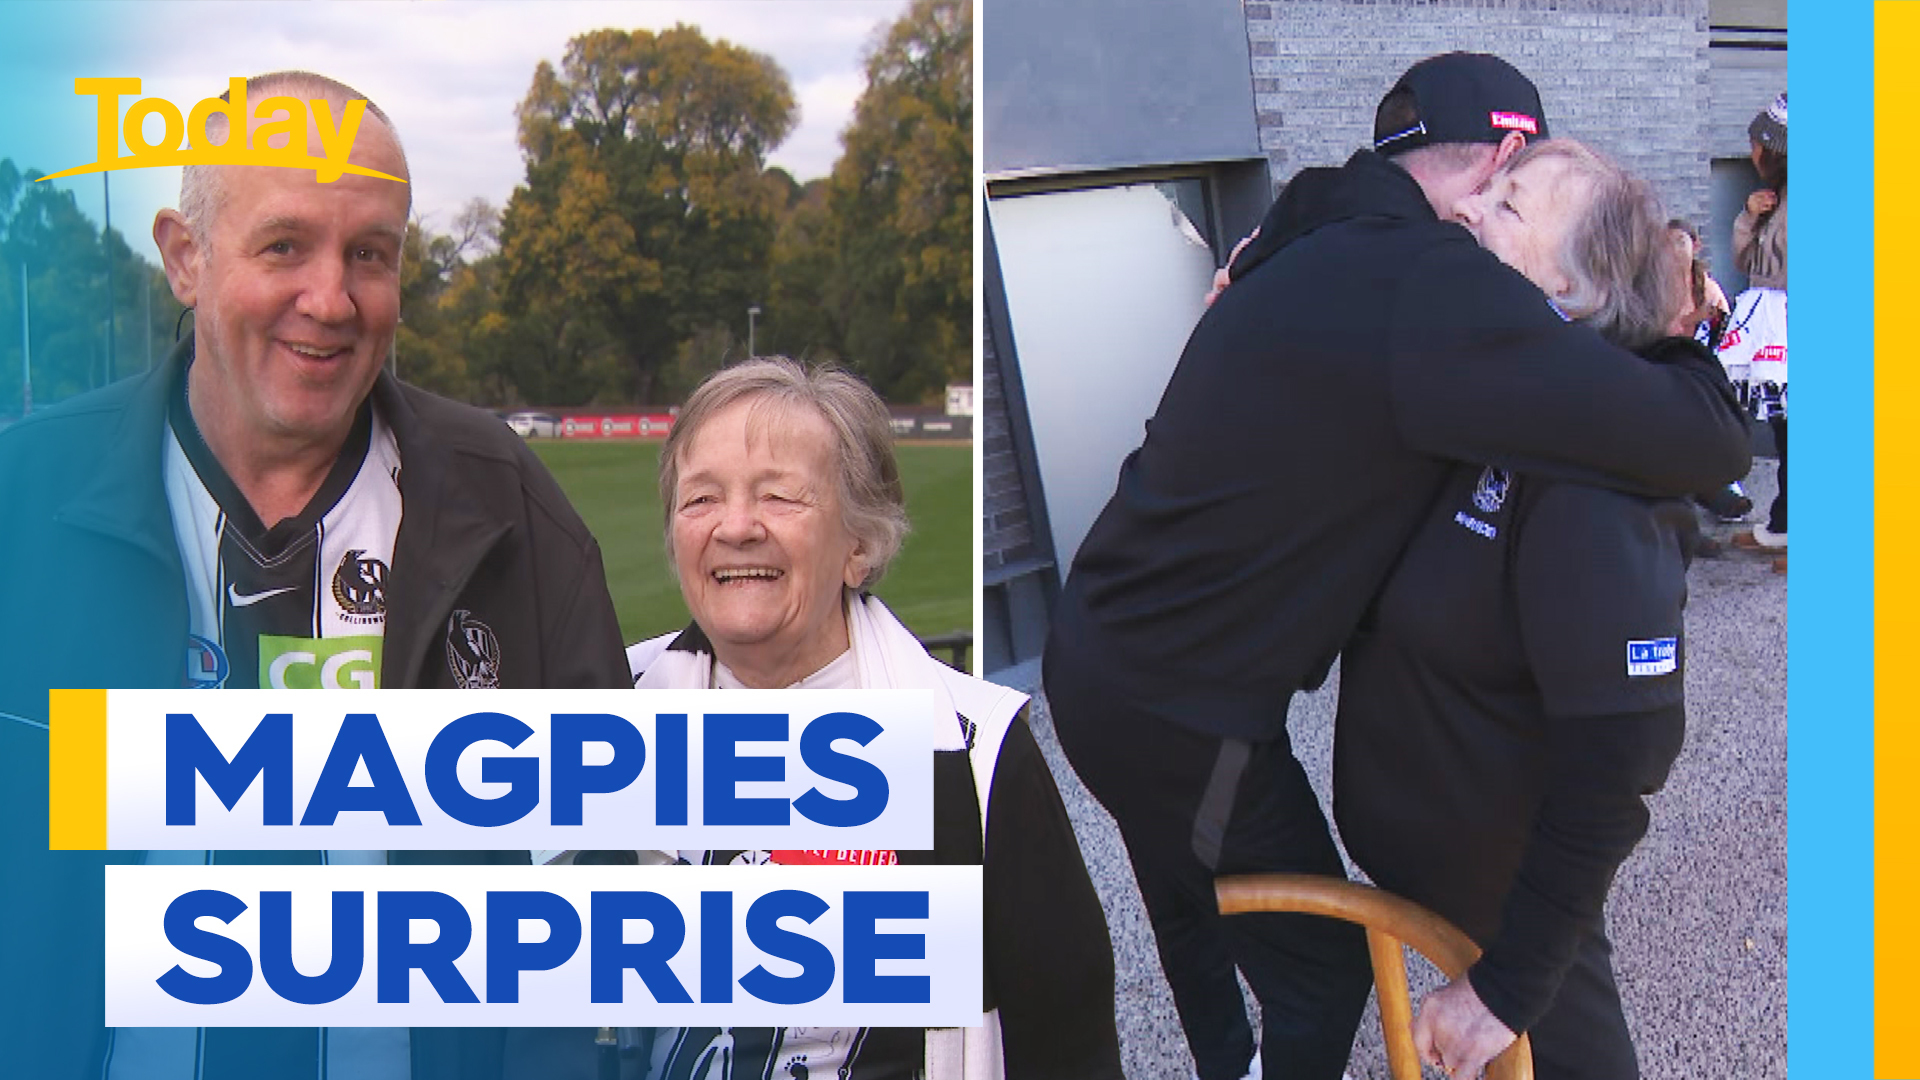 Gran hit by e-scooter given ultimate Magpies surprise